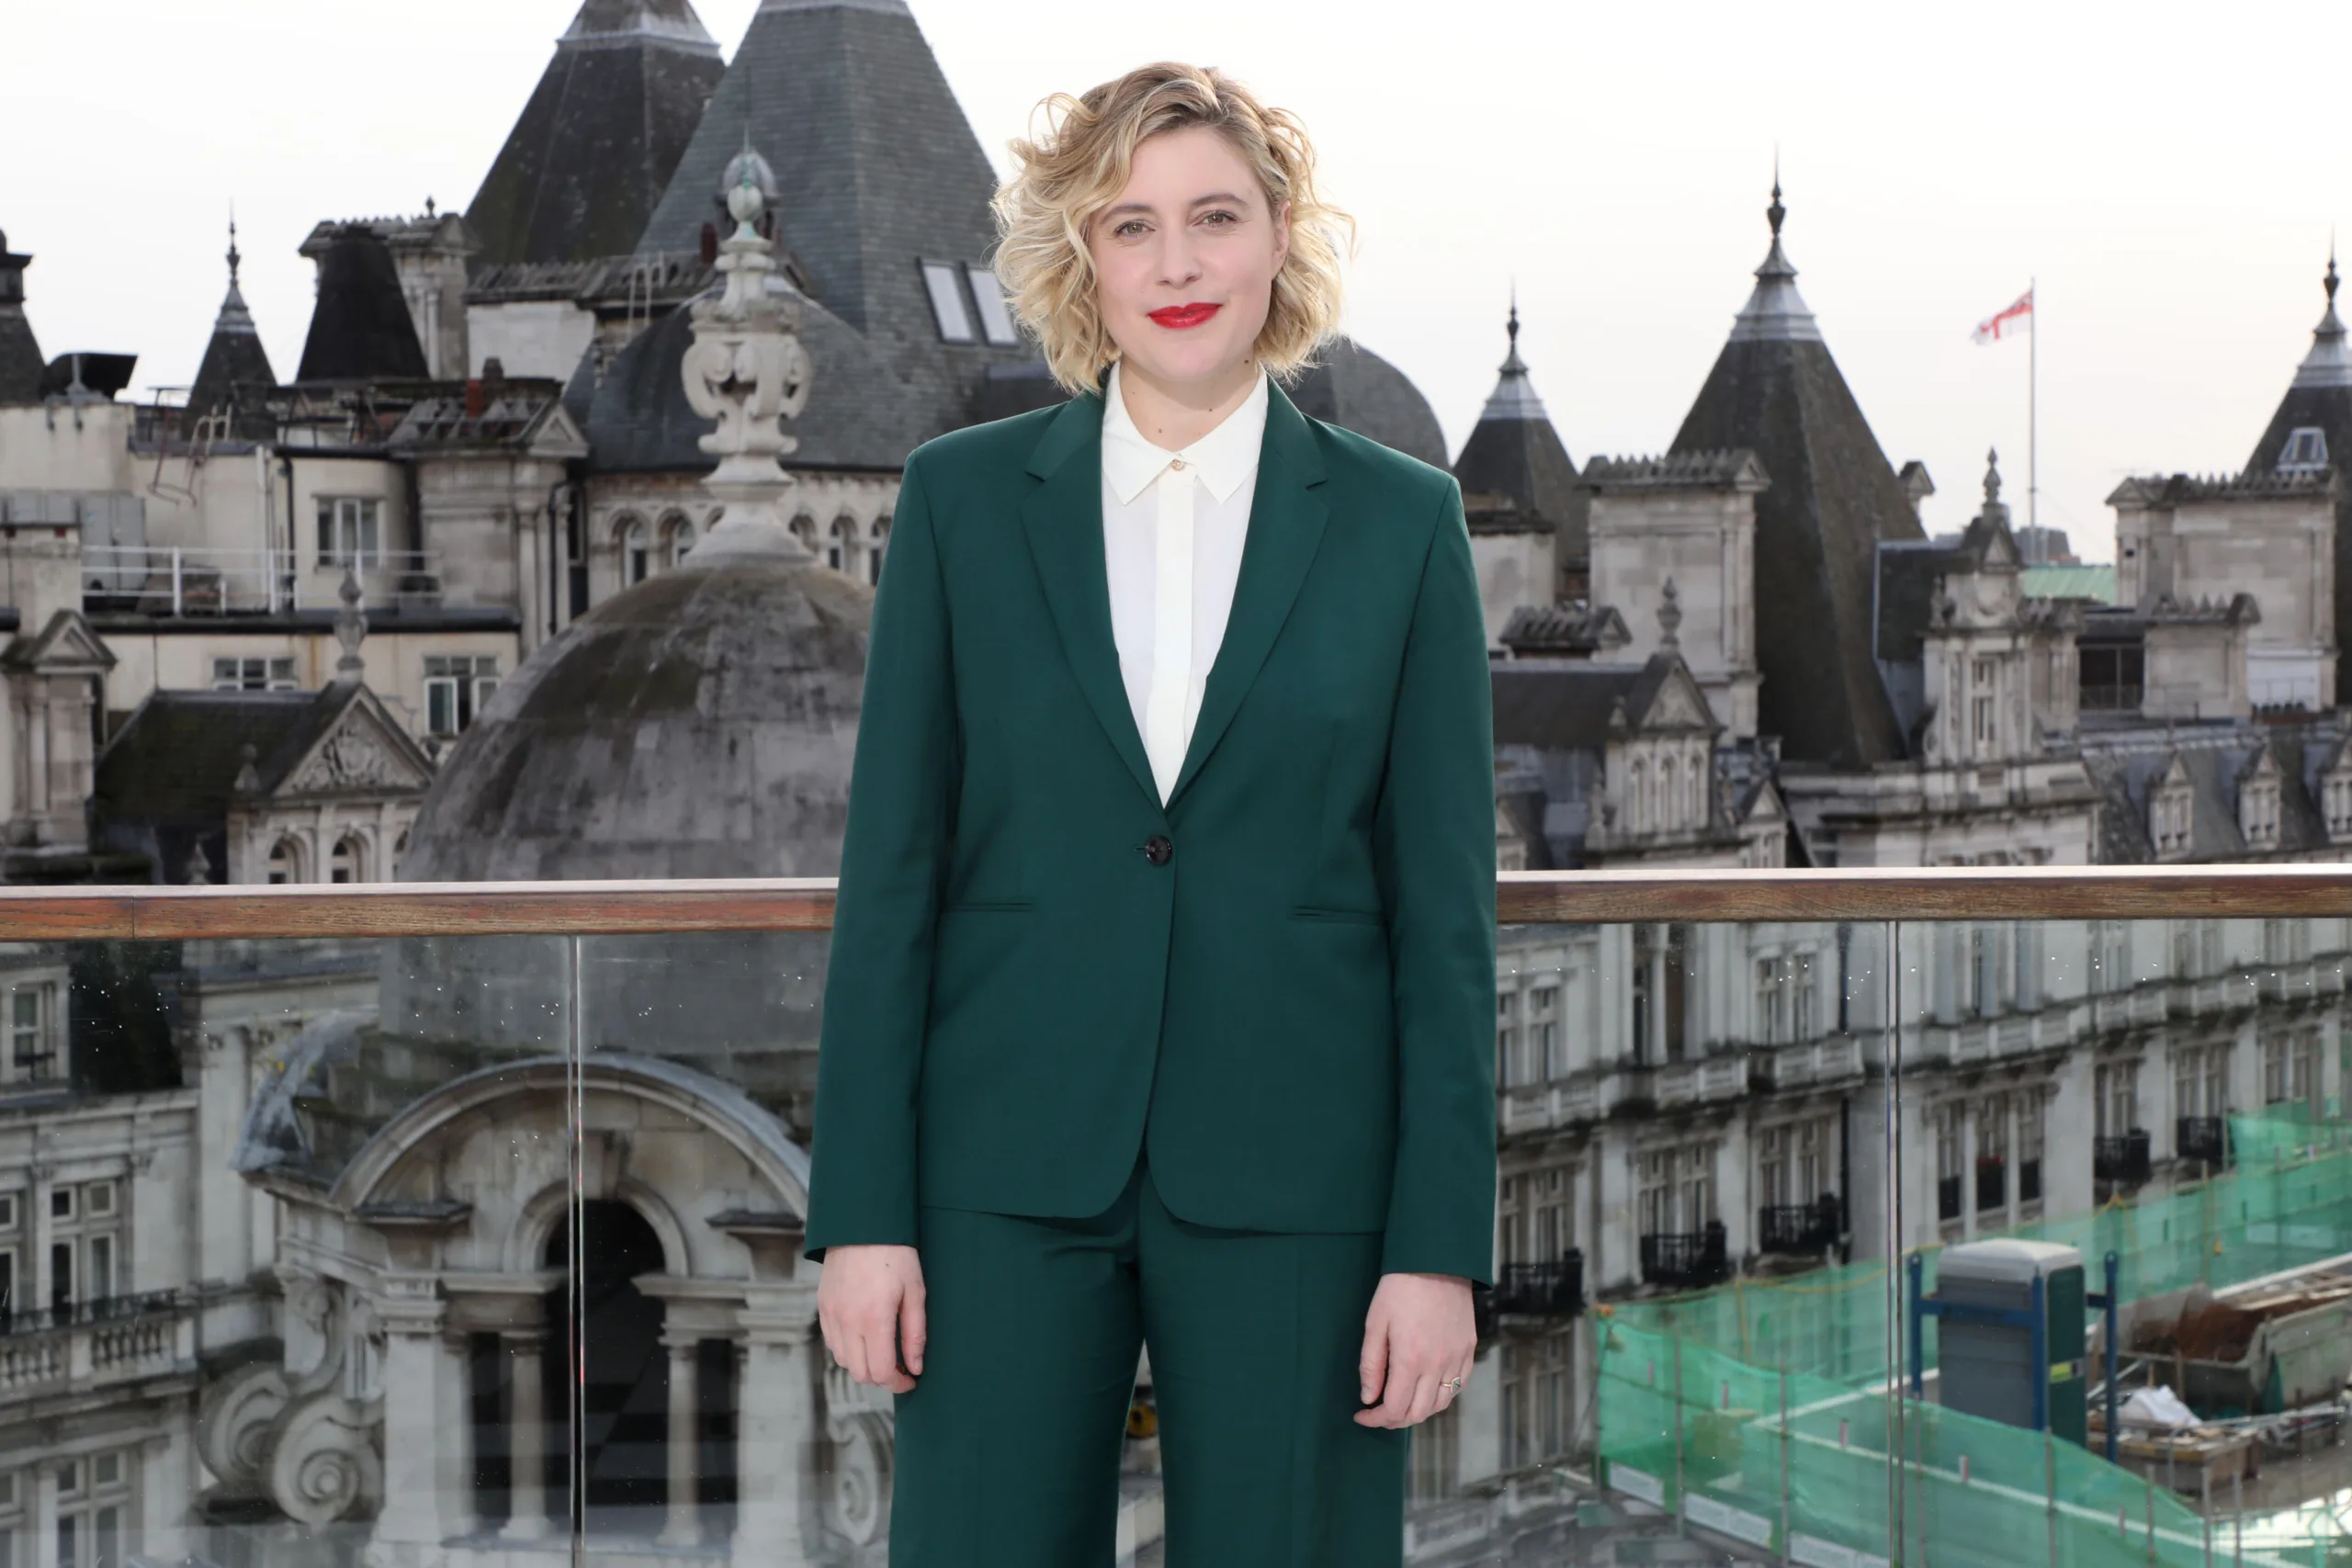 Greta Gerwig stands against city backdrop wearing green suit